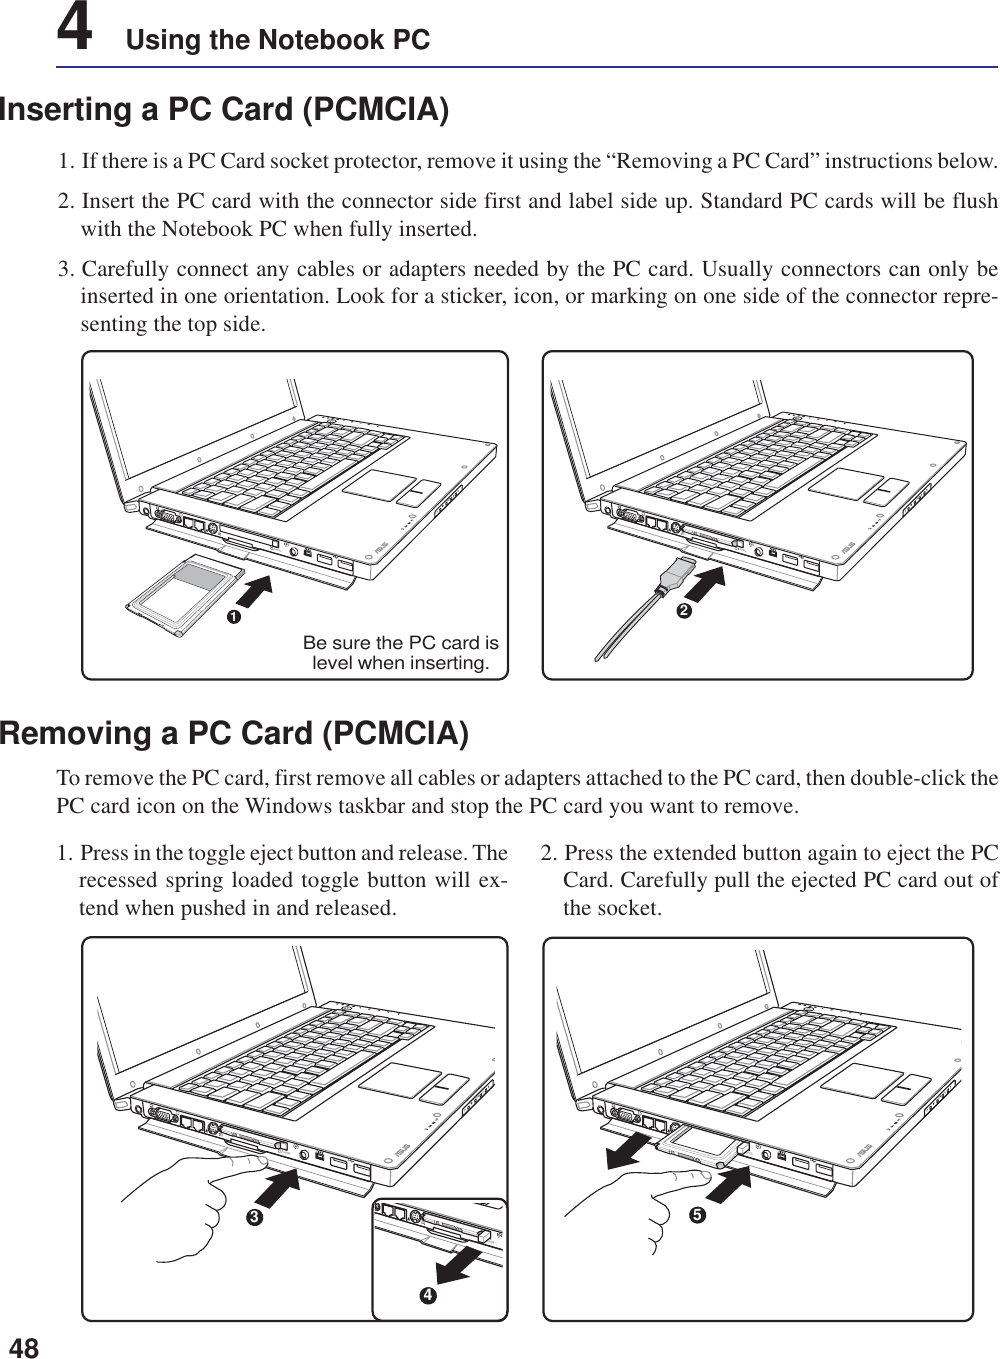 484    Using the Notebook PCInserting a PC Card (PCMCIA)1. If there is a PC Card socket protector, remove it using the “Removing a PC Card” instructions below.2. Insert the PC card with the connector side first and label side up. Standard PC cards will be flushwith the Notebook PC when fully inserted.3. Carefully connect any cables or adapters needed by the PC card. Usually connectors can only beinserted in one orientation. Look for a sticker, icon, or marking on one side of the connector repre-senting the top side.1. Press in the toggle eject button and release. Therecessed spring loaded toggle button will ex-tend when pushed in and released.2. Press the extended button again to eject the PCCard. Carefully pull the ejected PC card out ofthe socket.Removing a PC Card (PCMCIA)To remove the PC card, first remove all cables or adapters attached to the PC card, then double-click thePC card icon on the Windows taskbar and stop the PC card you want to remove.remote5remote3remote4remote1Be sure the PC card islevel when inserting.remote2